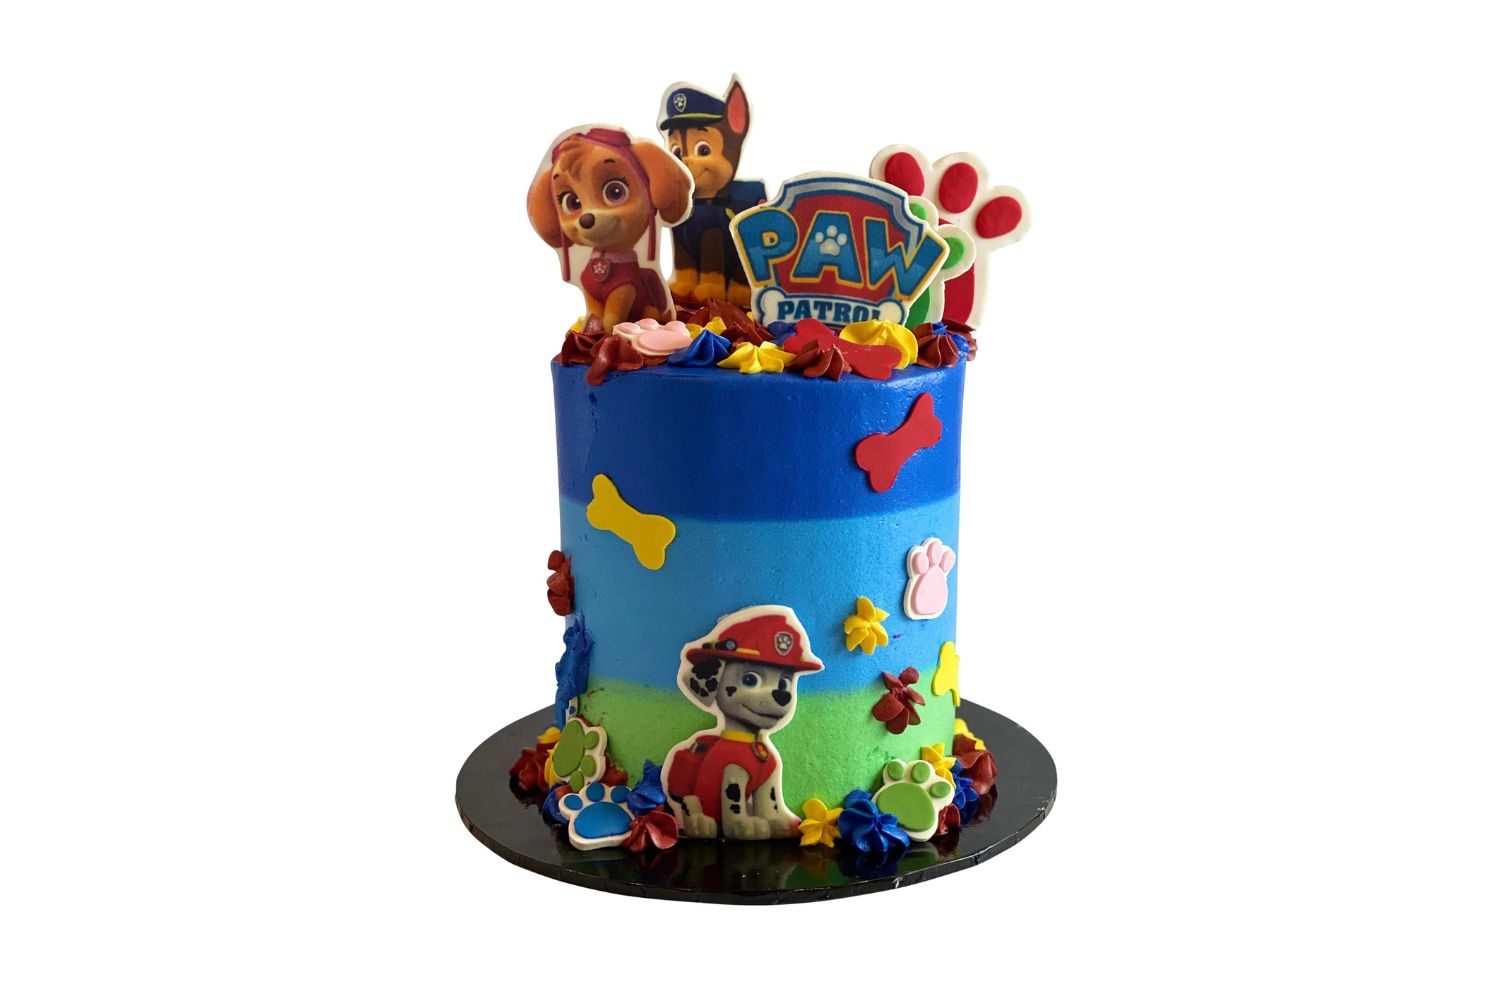 16-astounding-facts-about-paw-patrol-cake